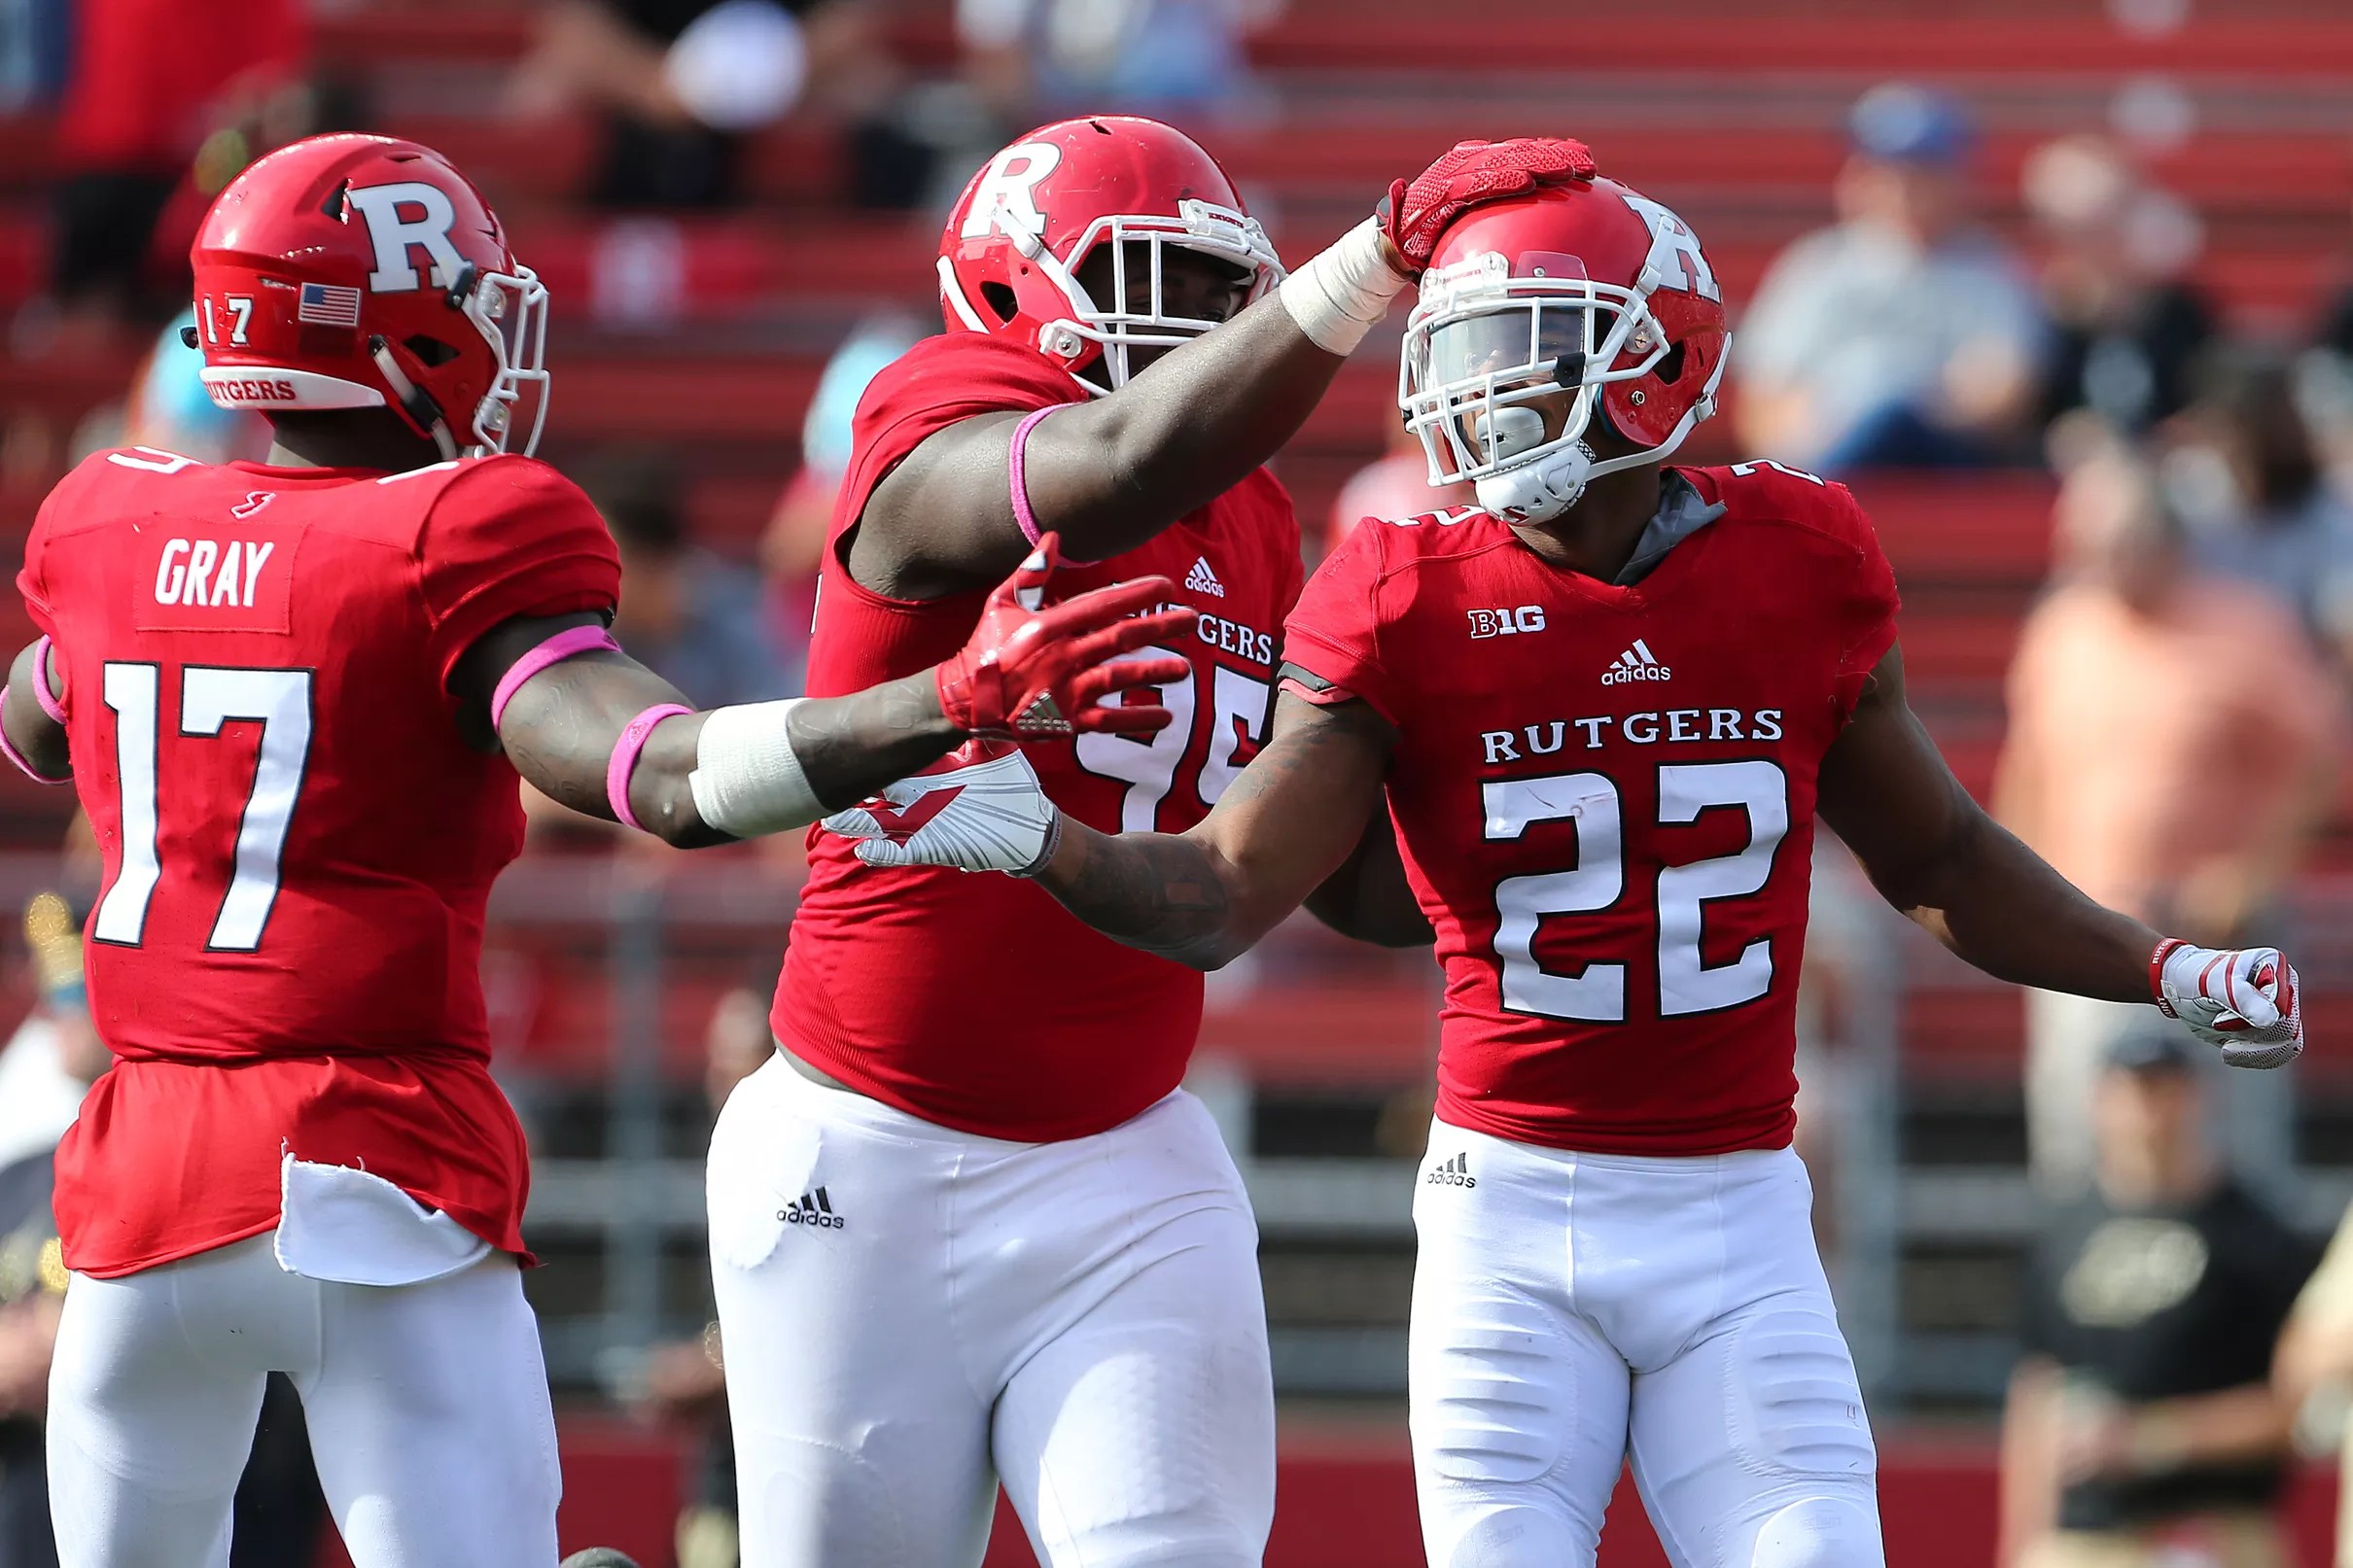 Rutgers Spring Football W2W4 in the Spring Game